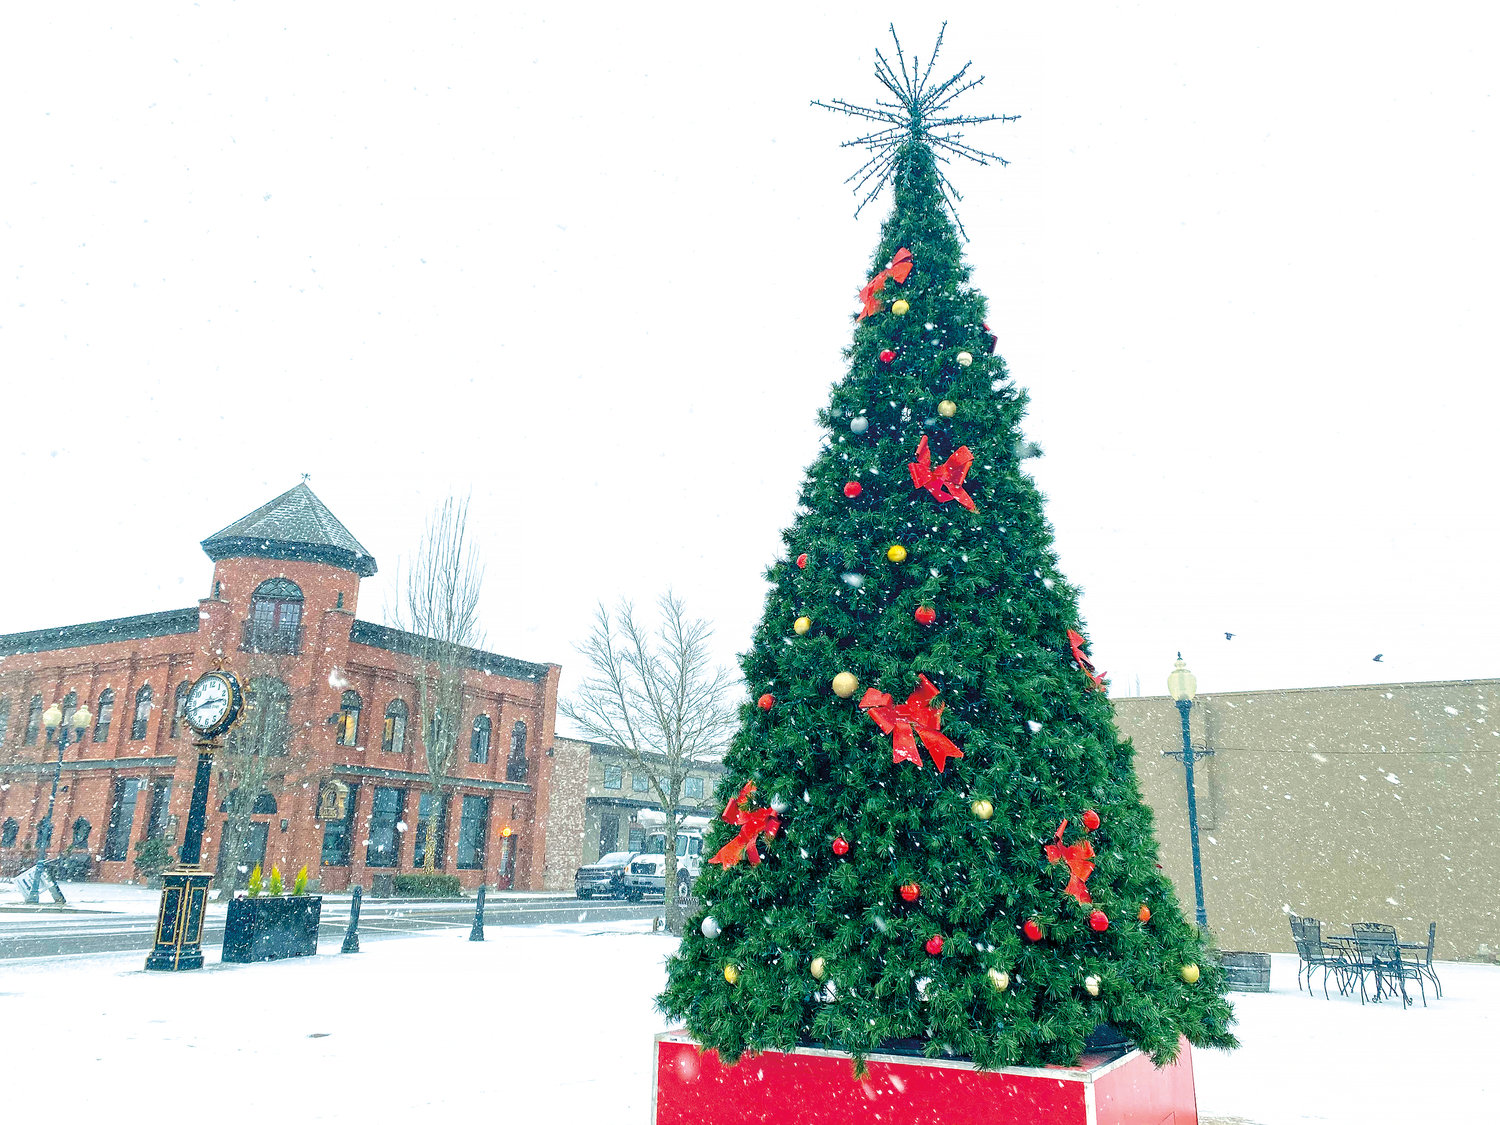 The first snowfall of the season paired with a newly-assembled Christmas tree created a winter wonderland in downtown Blaine on November 29. The tree will be lit during the Holiday Harbor Lights festival on Saturday, December 3.